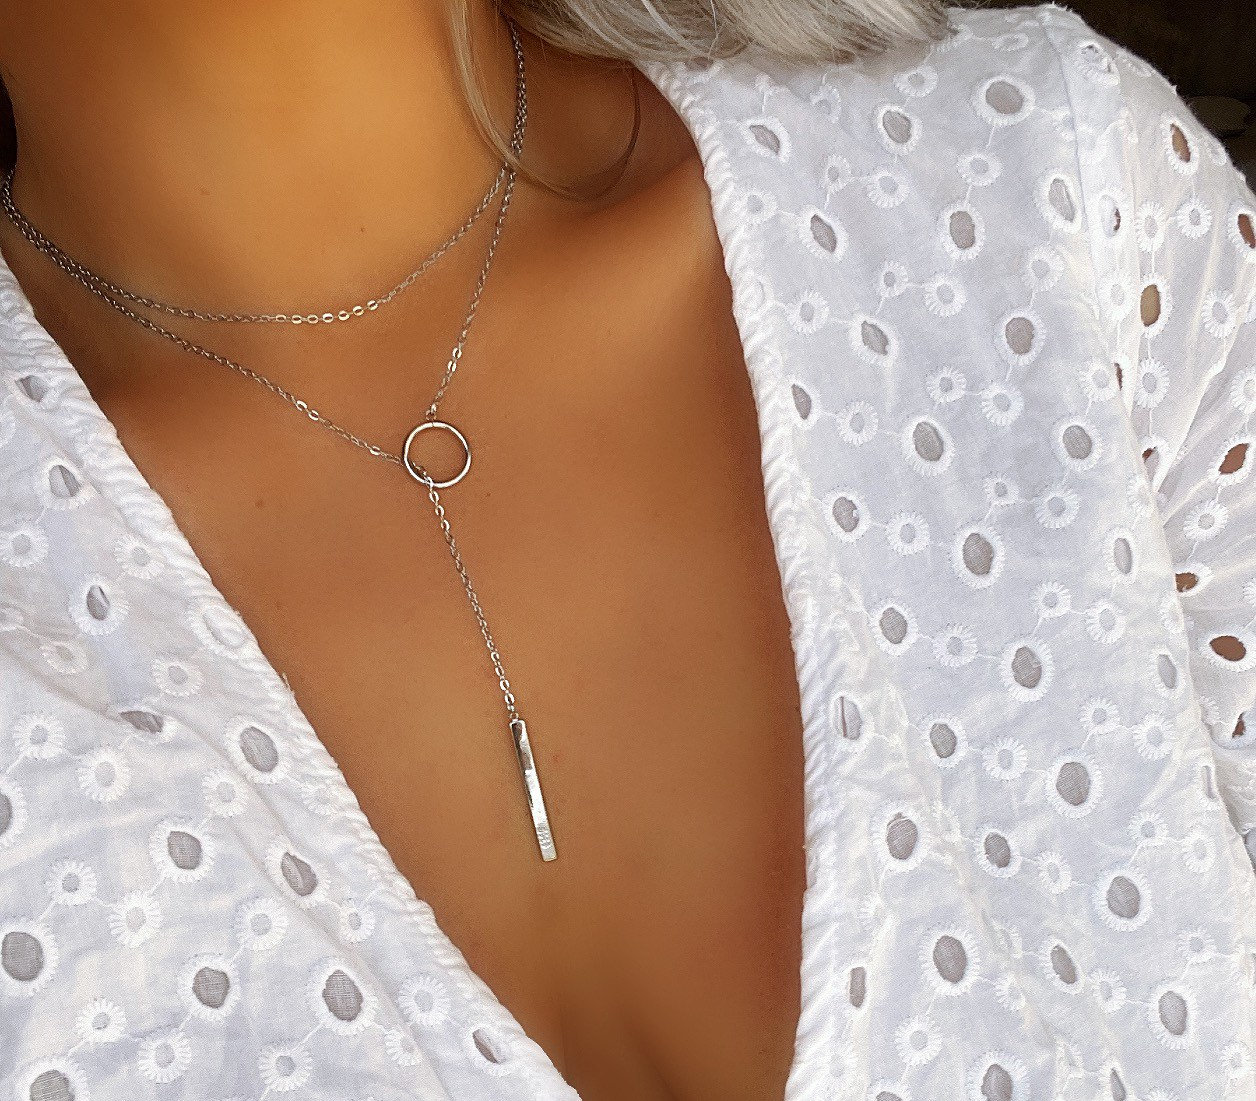 Silver Chain for Pendant, Small Diameter Threader End for Small Loop Pendant, Thin Adjustable Sterling Silver Cable Chain 18 or 22 Inches